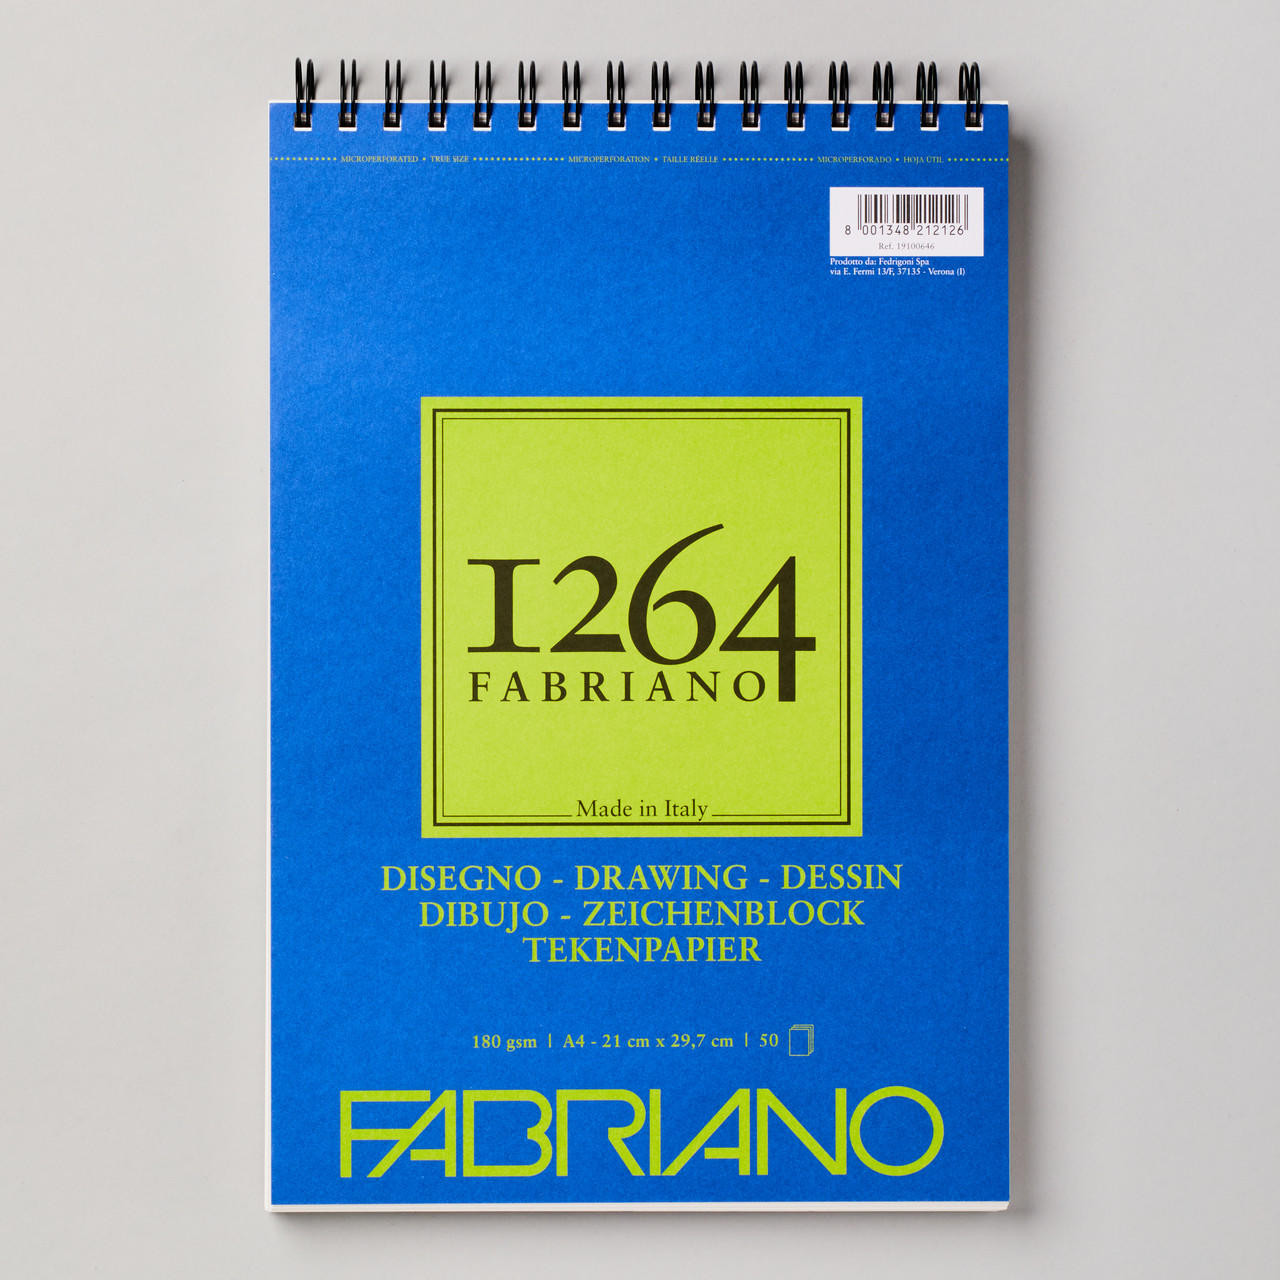 Fabriano 1264 Spiral Bound Drawing Pad 50 Sheets 180gsm A4